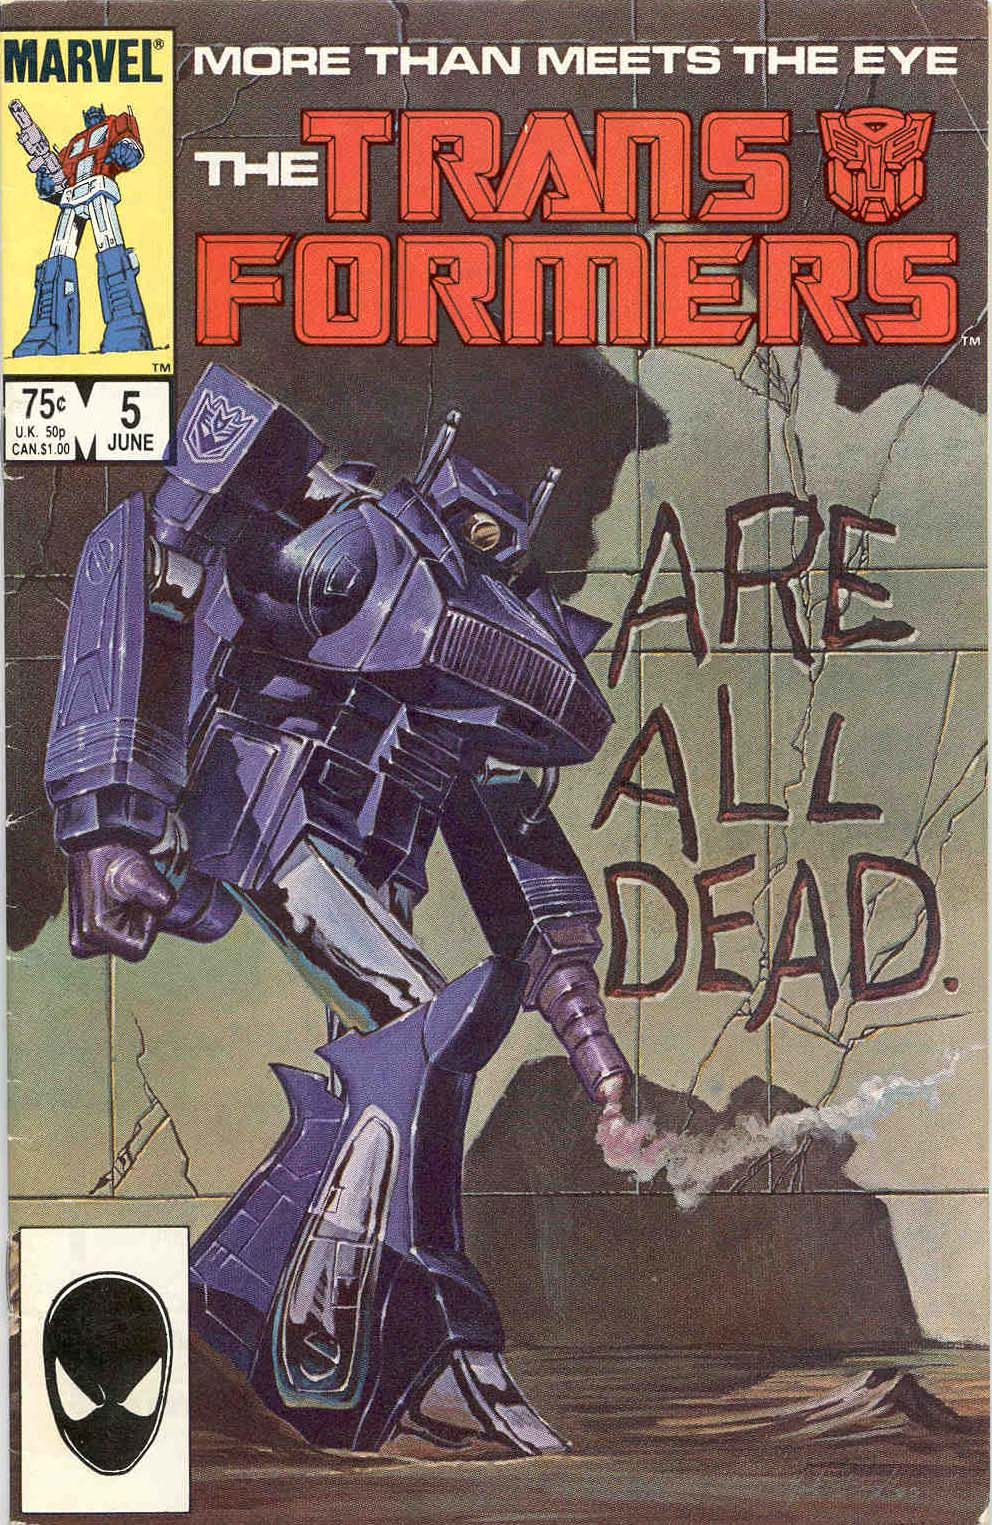 The cover to Transformers #5